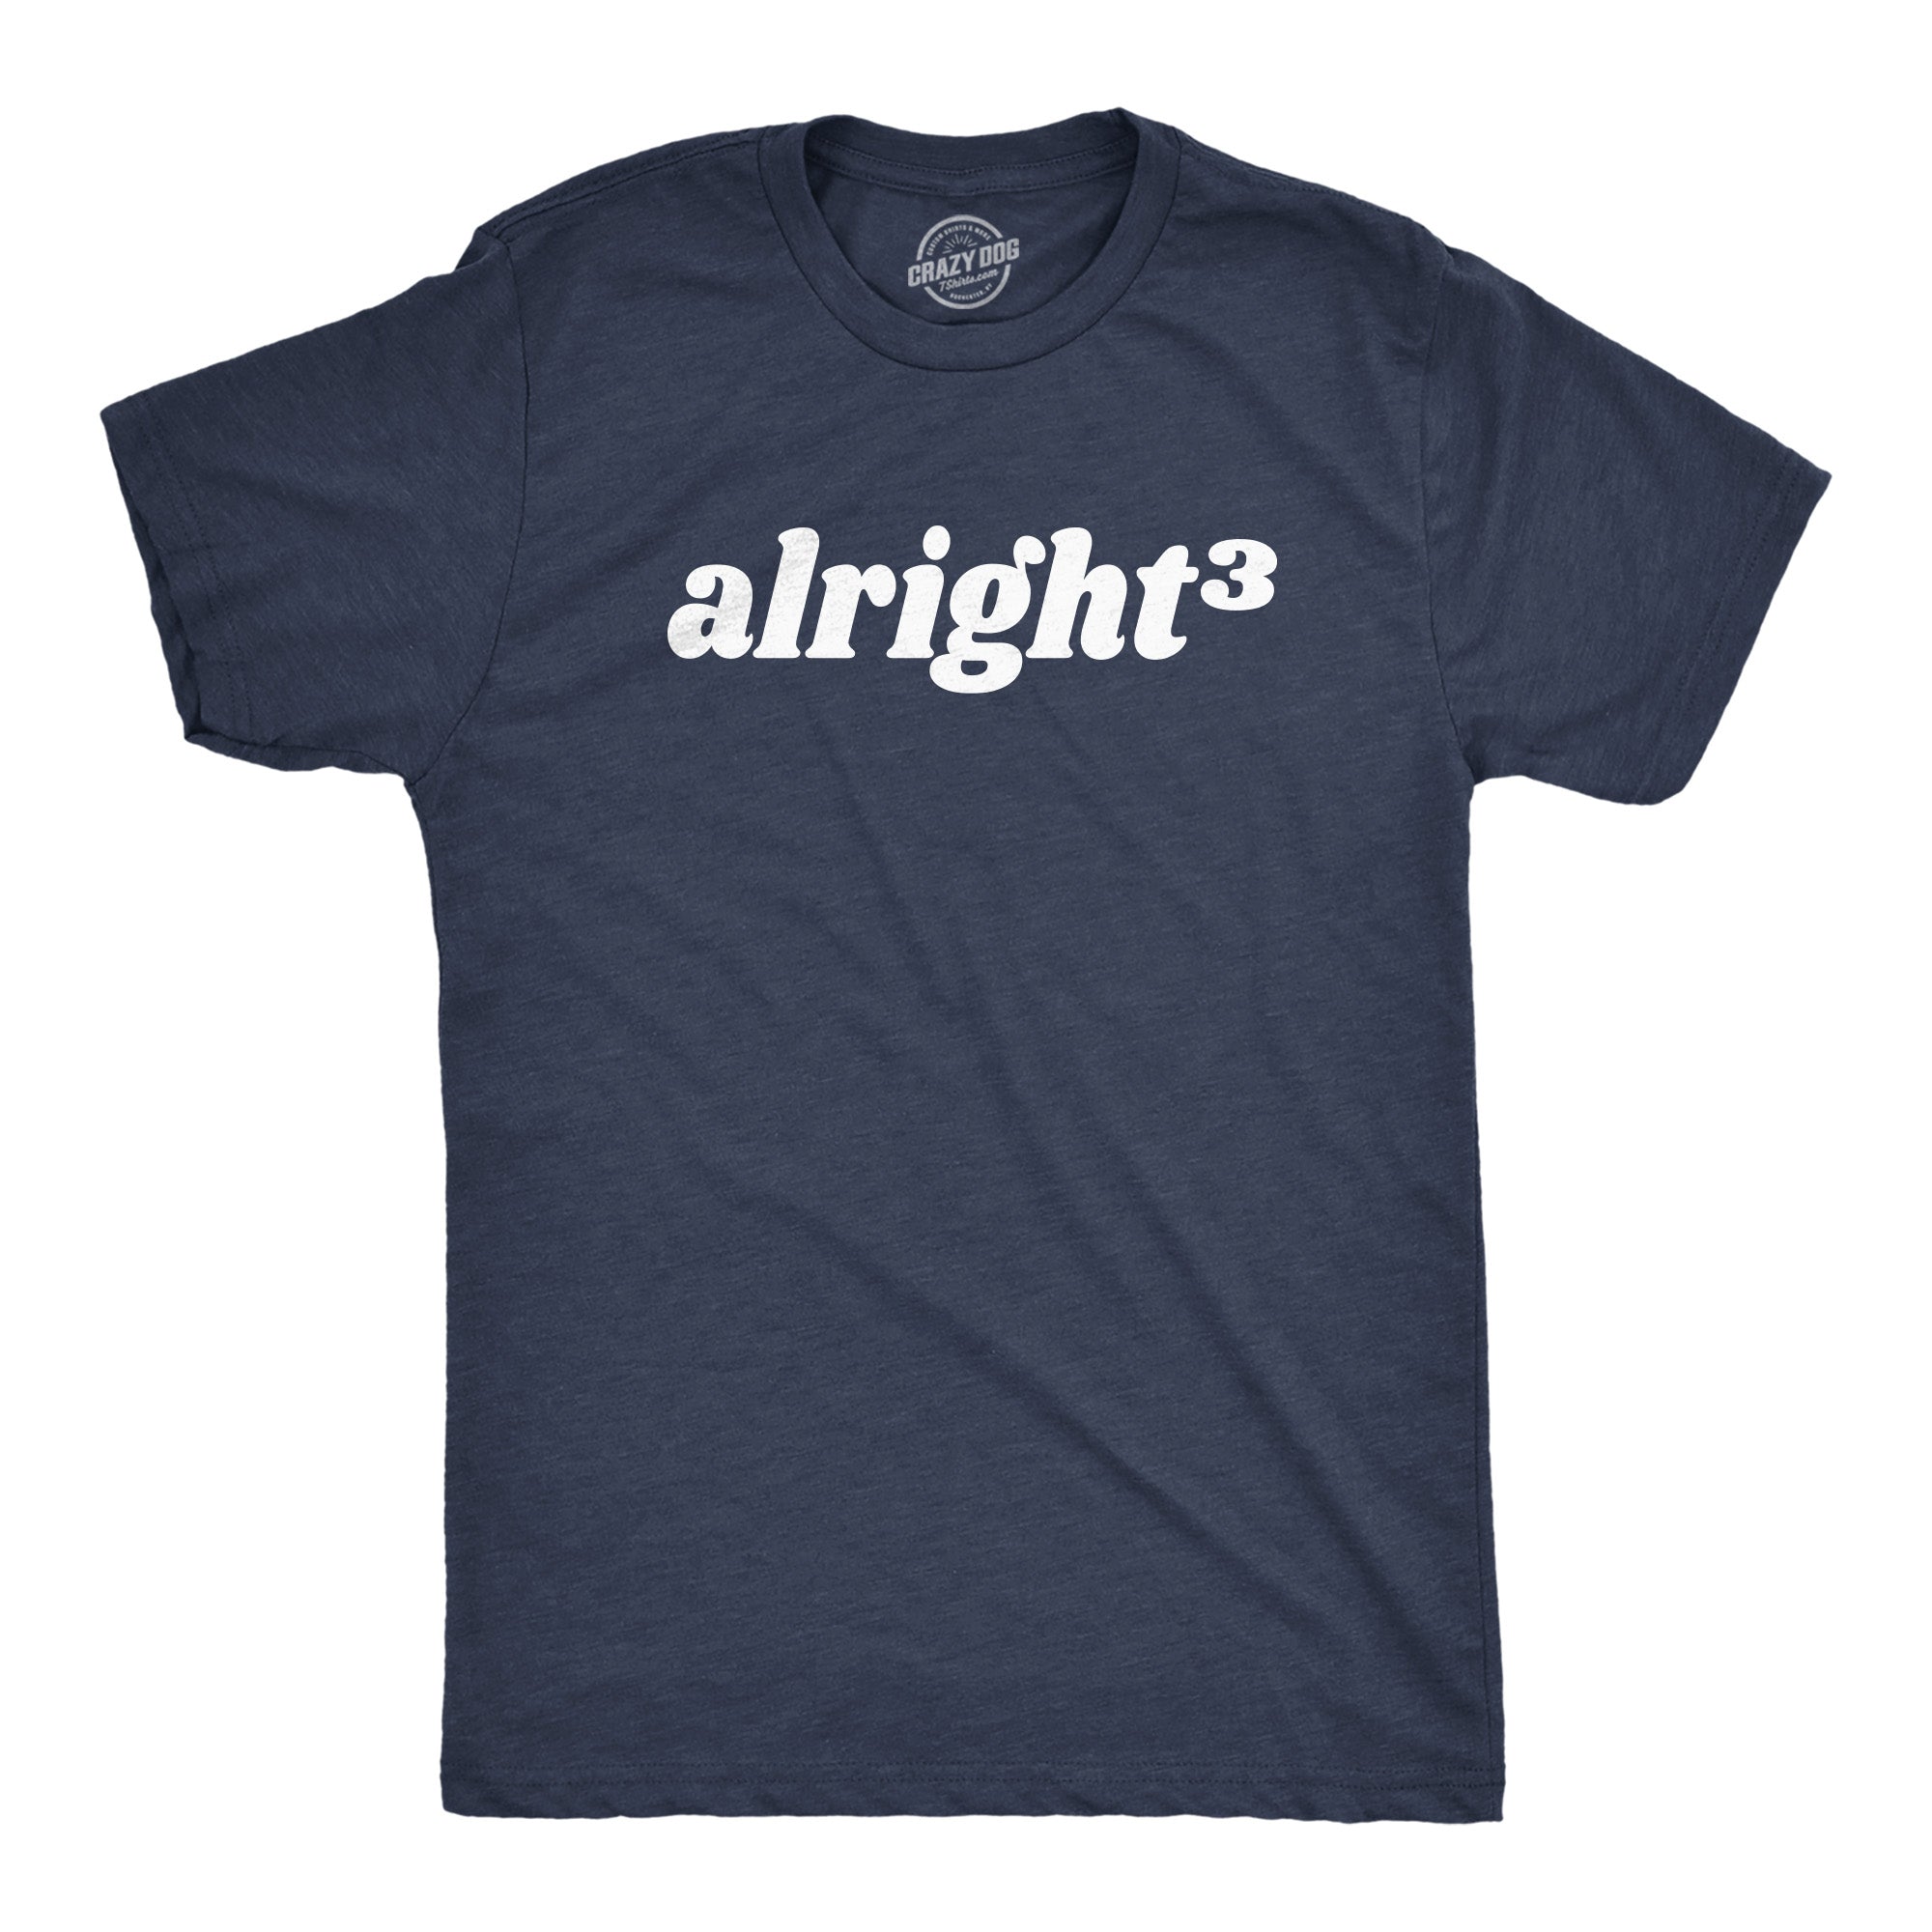 Funny Heather Navy - ALRIGHT Alright Cubed Mens T Shirt Nerdy Nerdy Sarcastic Tee